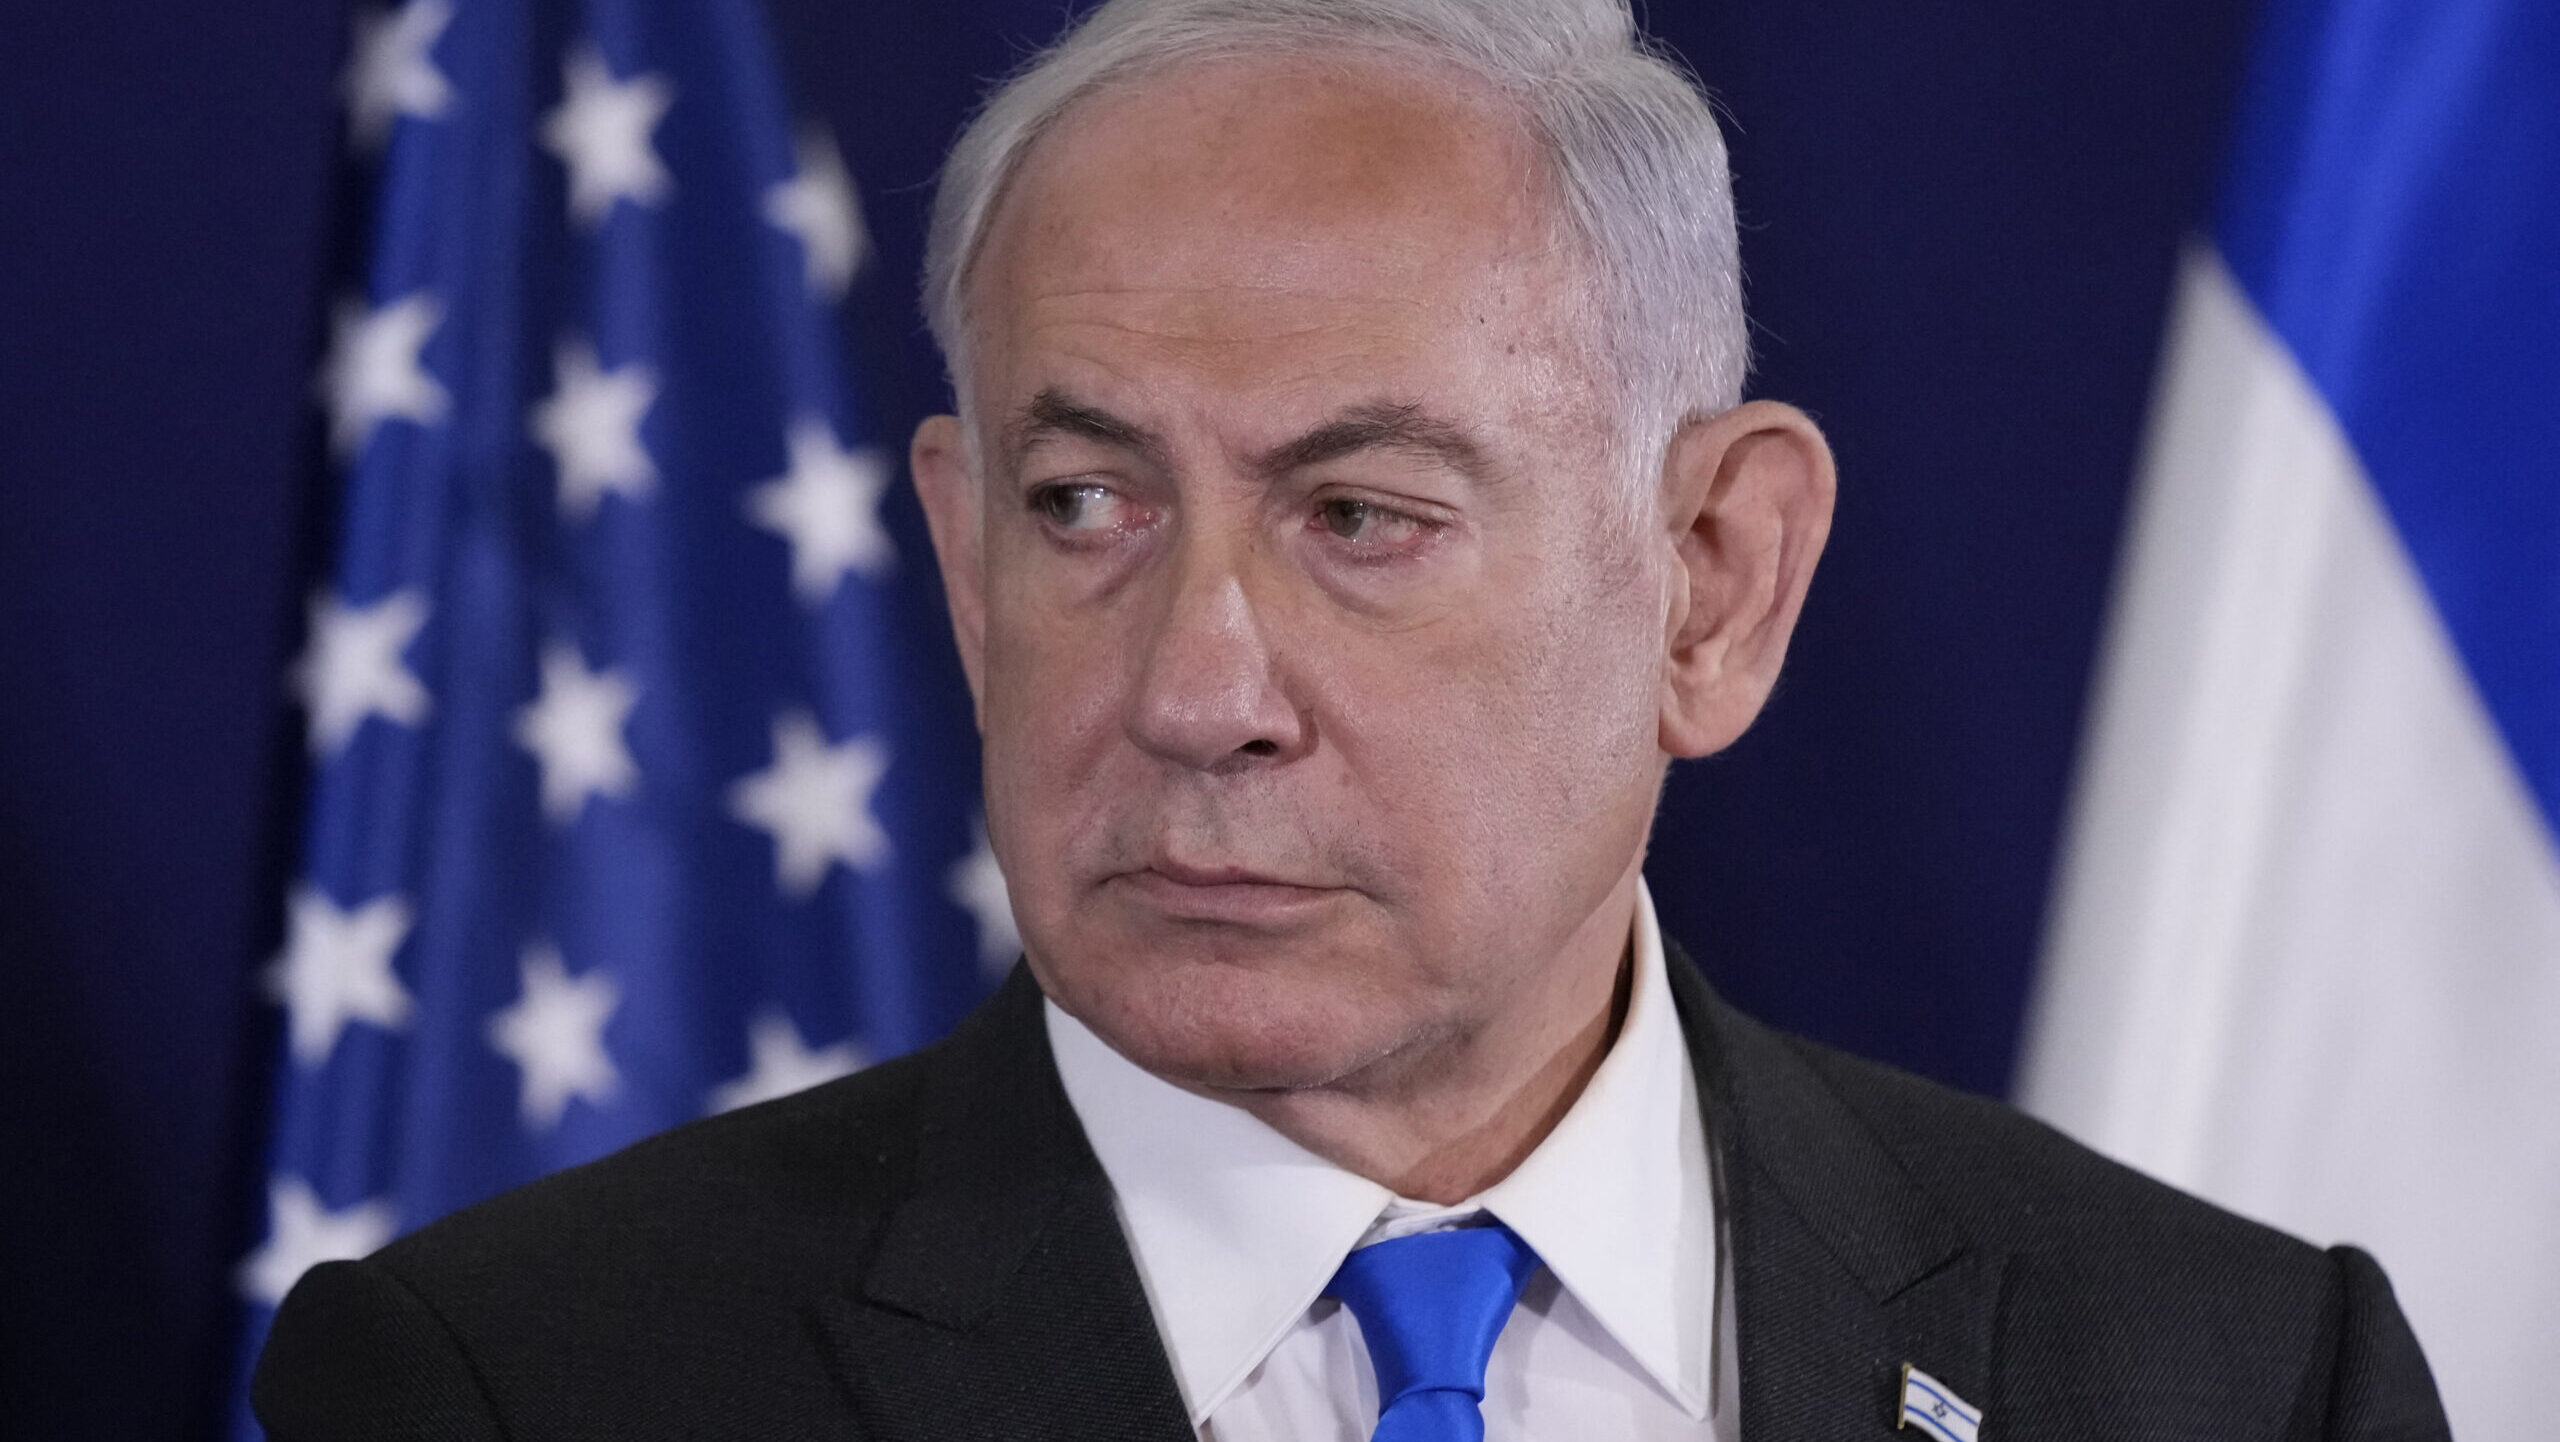 Netanyahu Confirms IDF To Launch Rafah Offensive, Sets Undisclosed Date